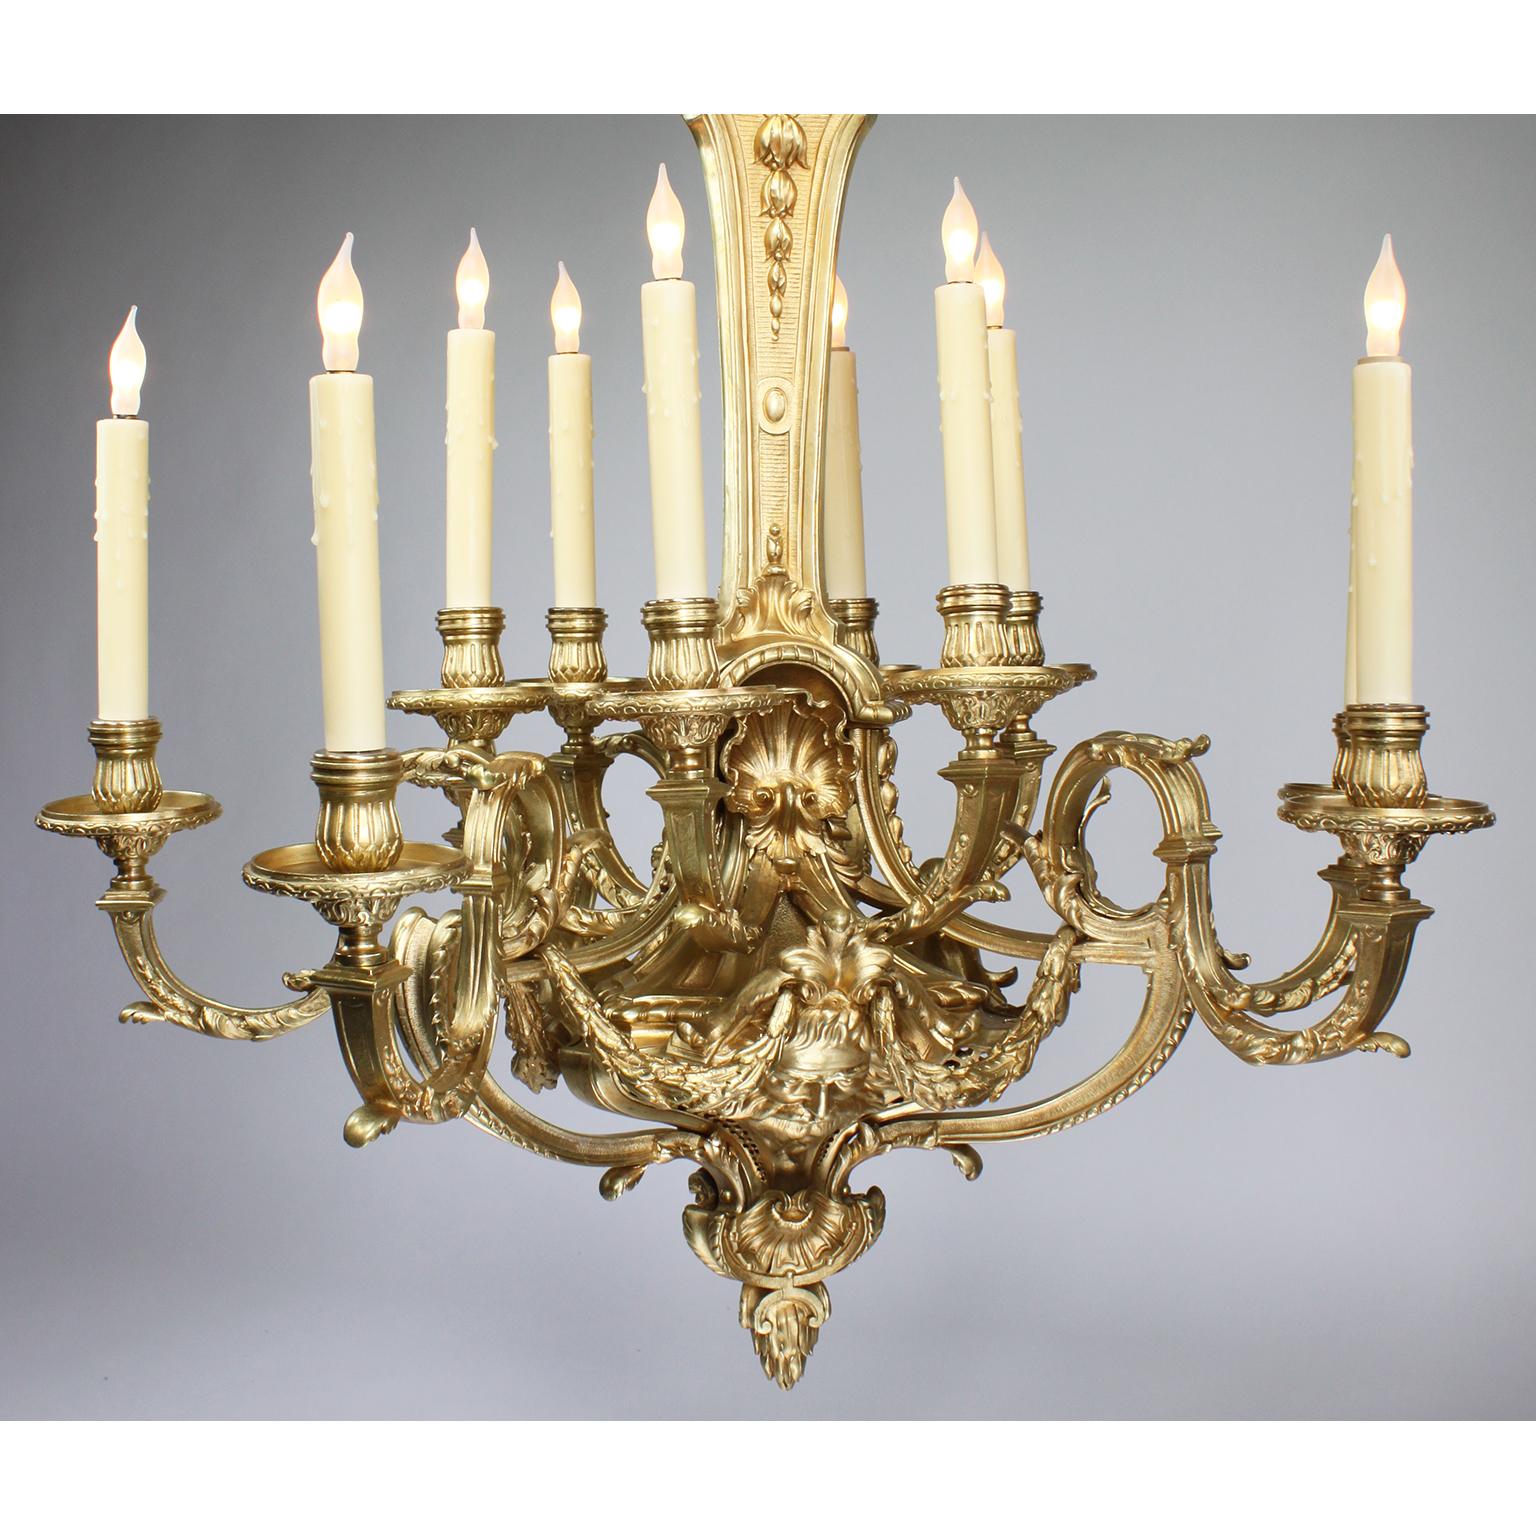 French Régence Style Belle-Époque Gilt-Bronze Twelve-Light Figural Chandelier In Good Condition For Sale In Los Angeles, CA